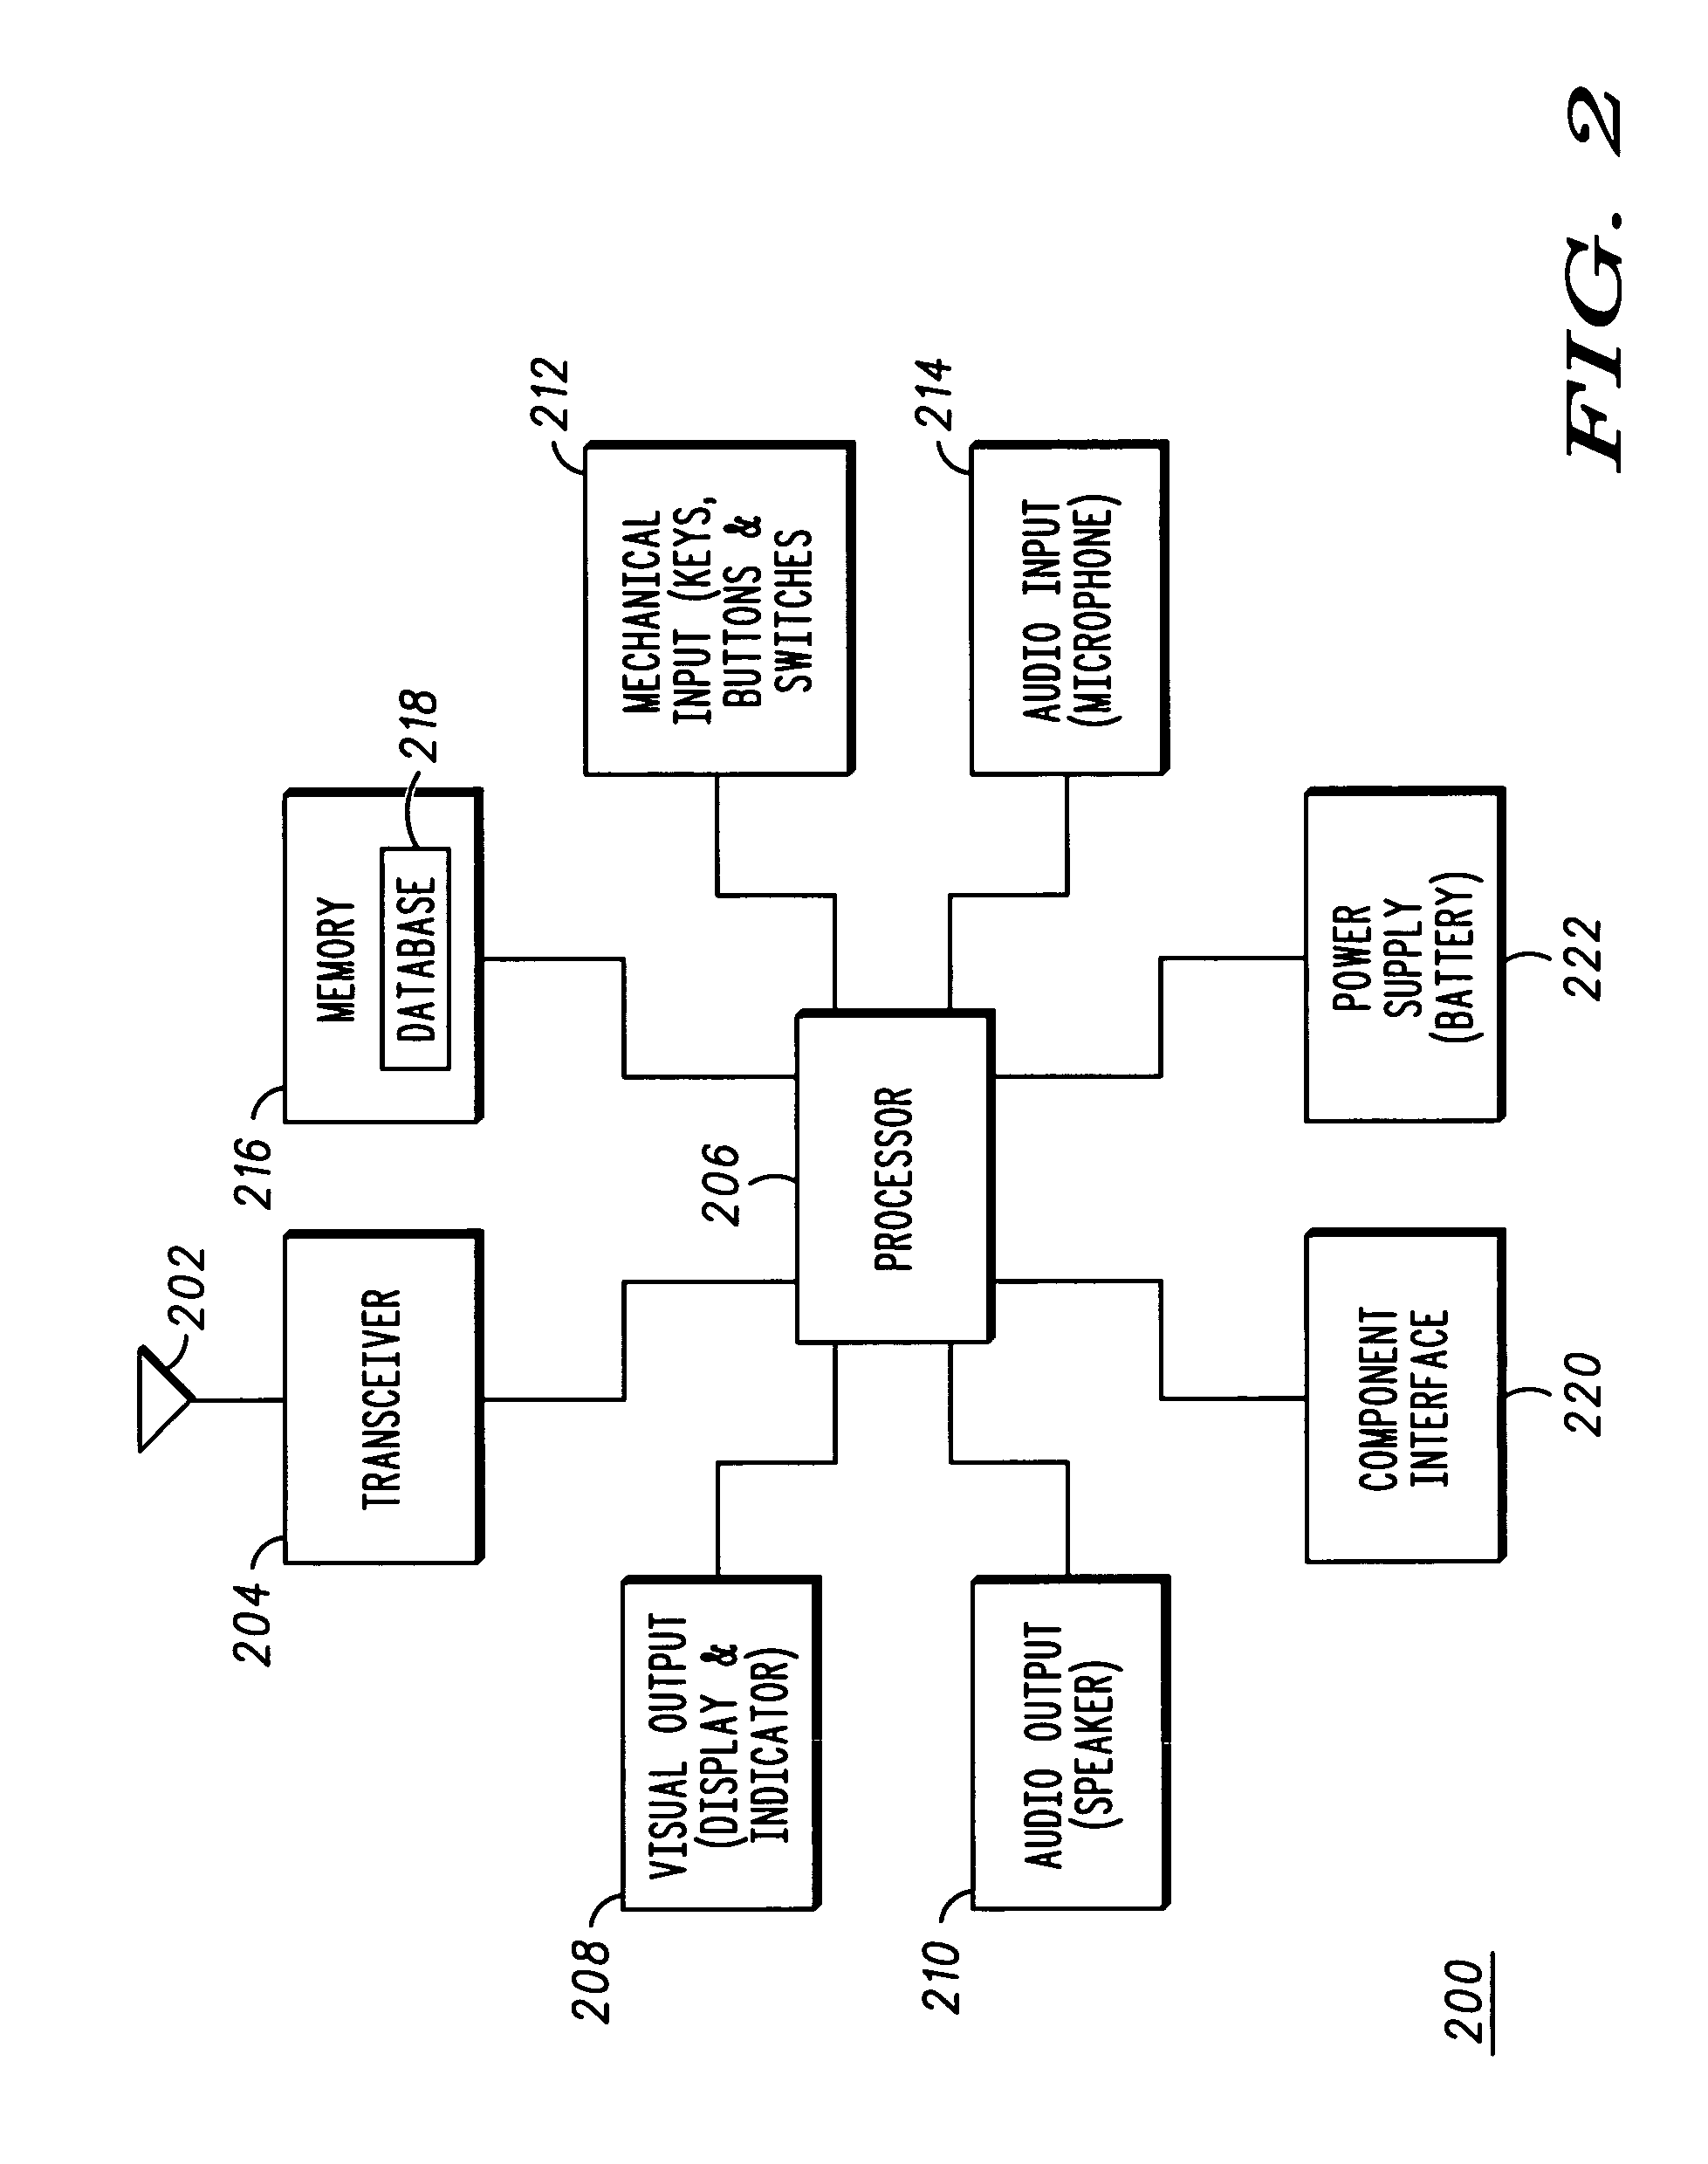 Apparatus and method for forming compound words